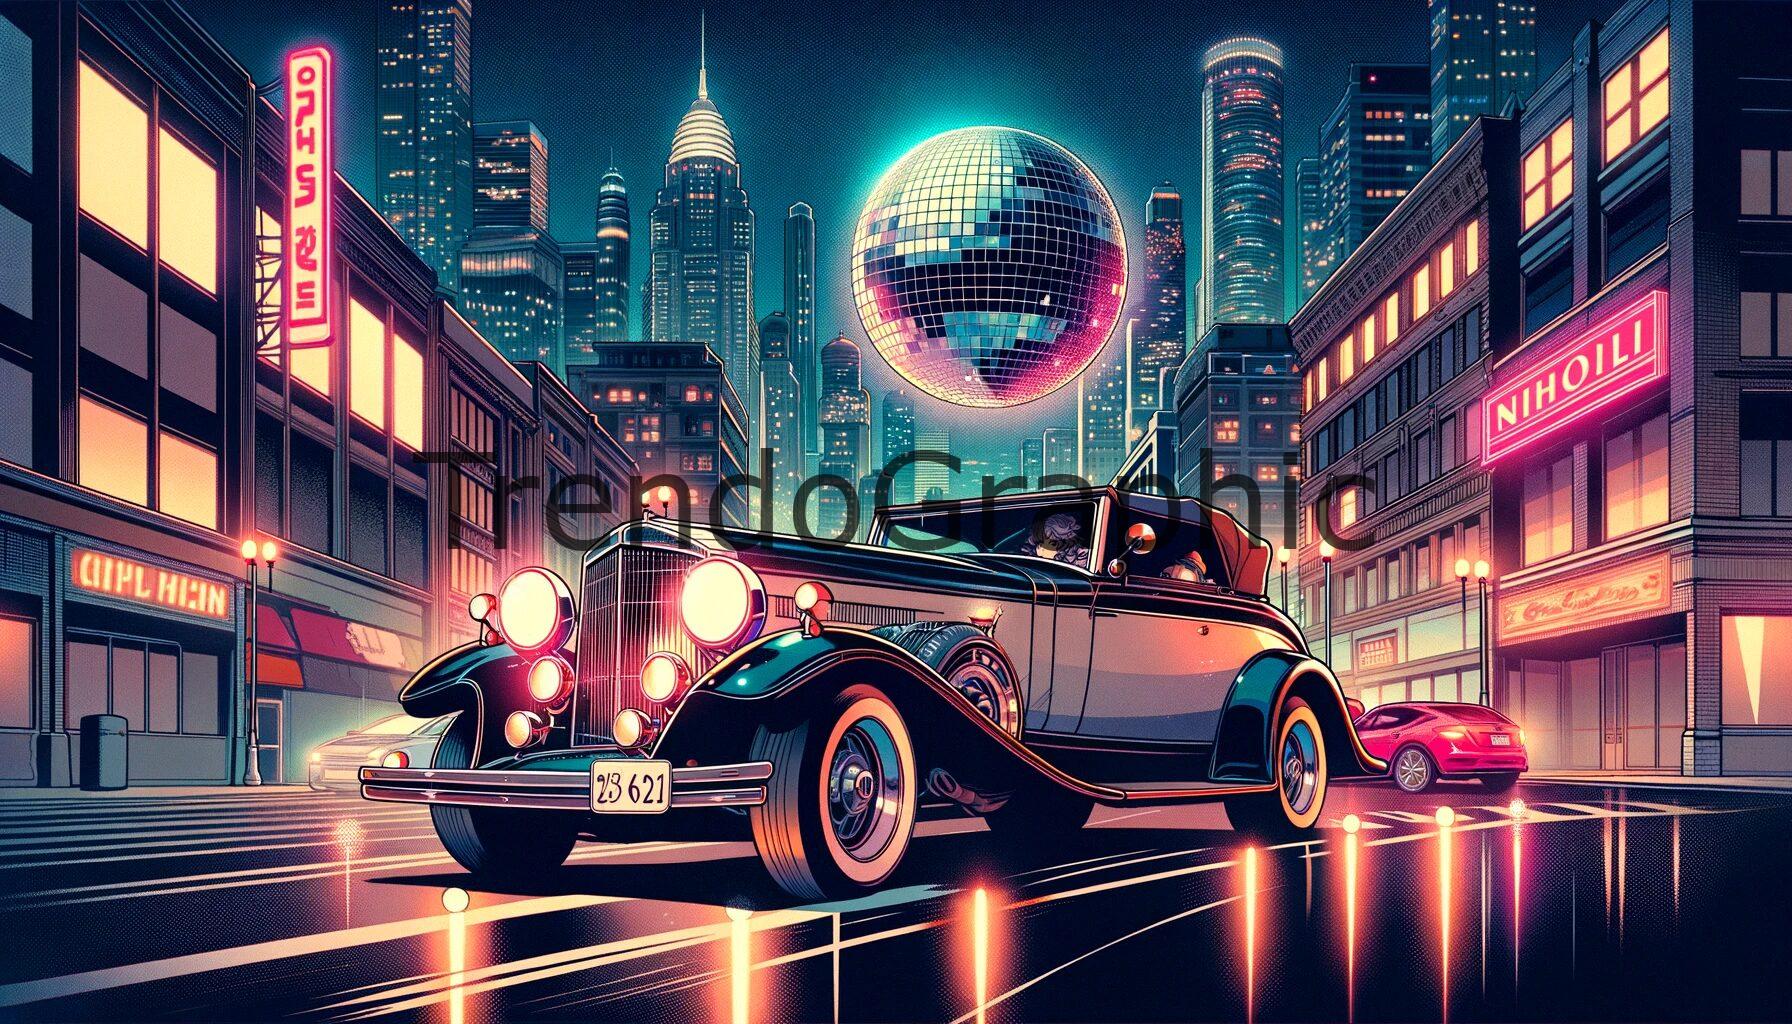 Nighttime City Cruise: Vintage Car with Disco Ball Charm